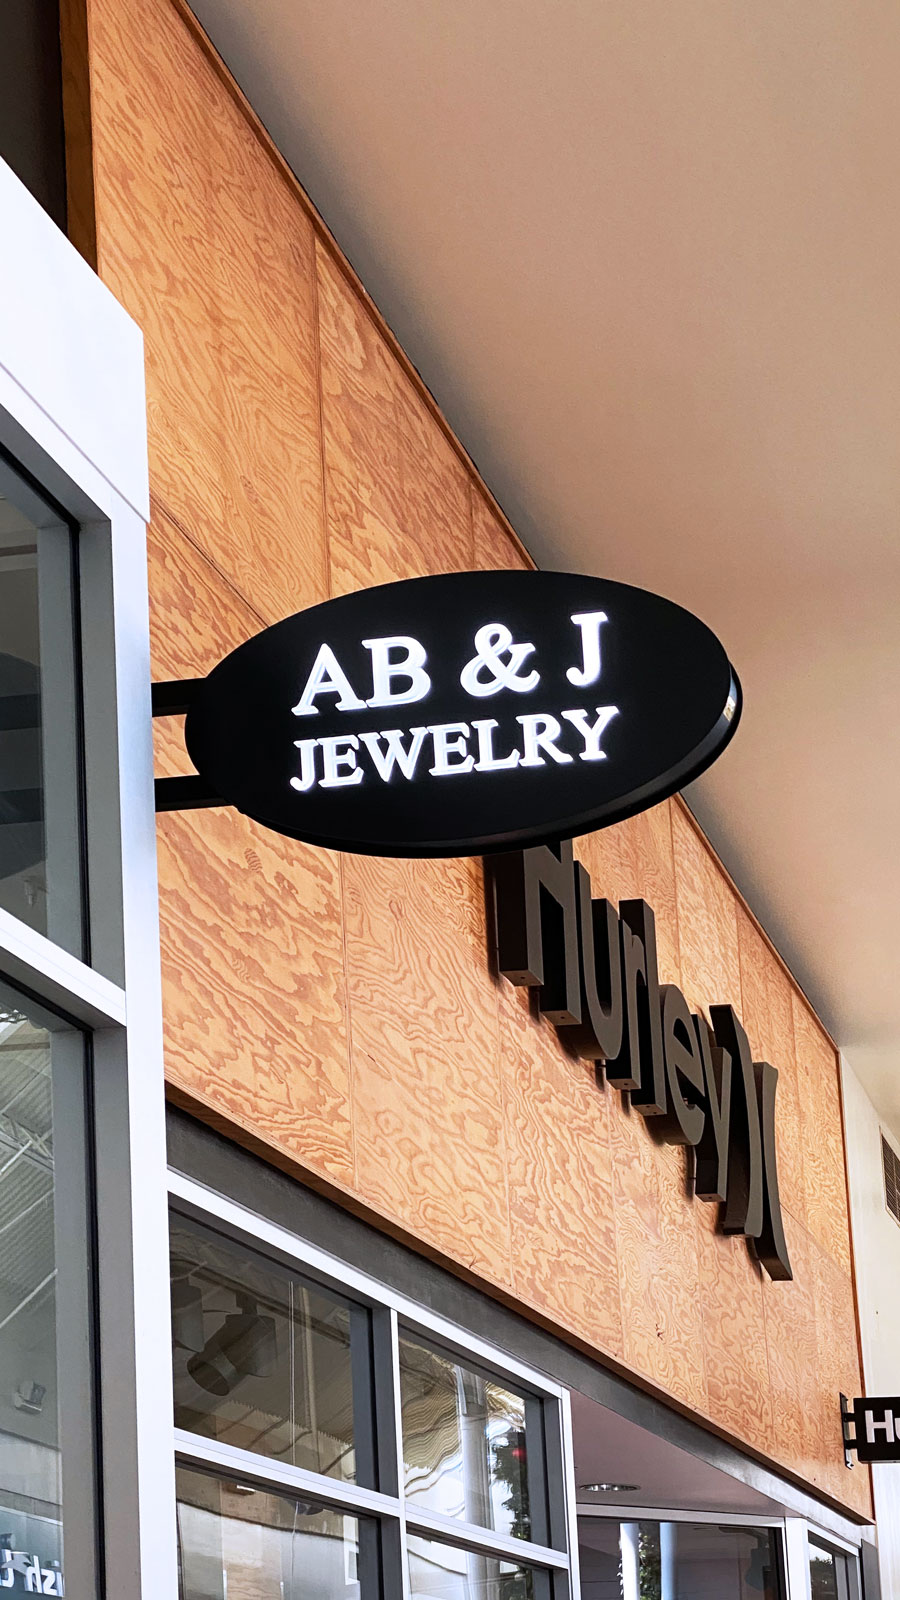 AB & J Jewelry light box sign in an oval shape made of aluminum and acrylic for branding